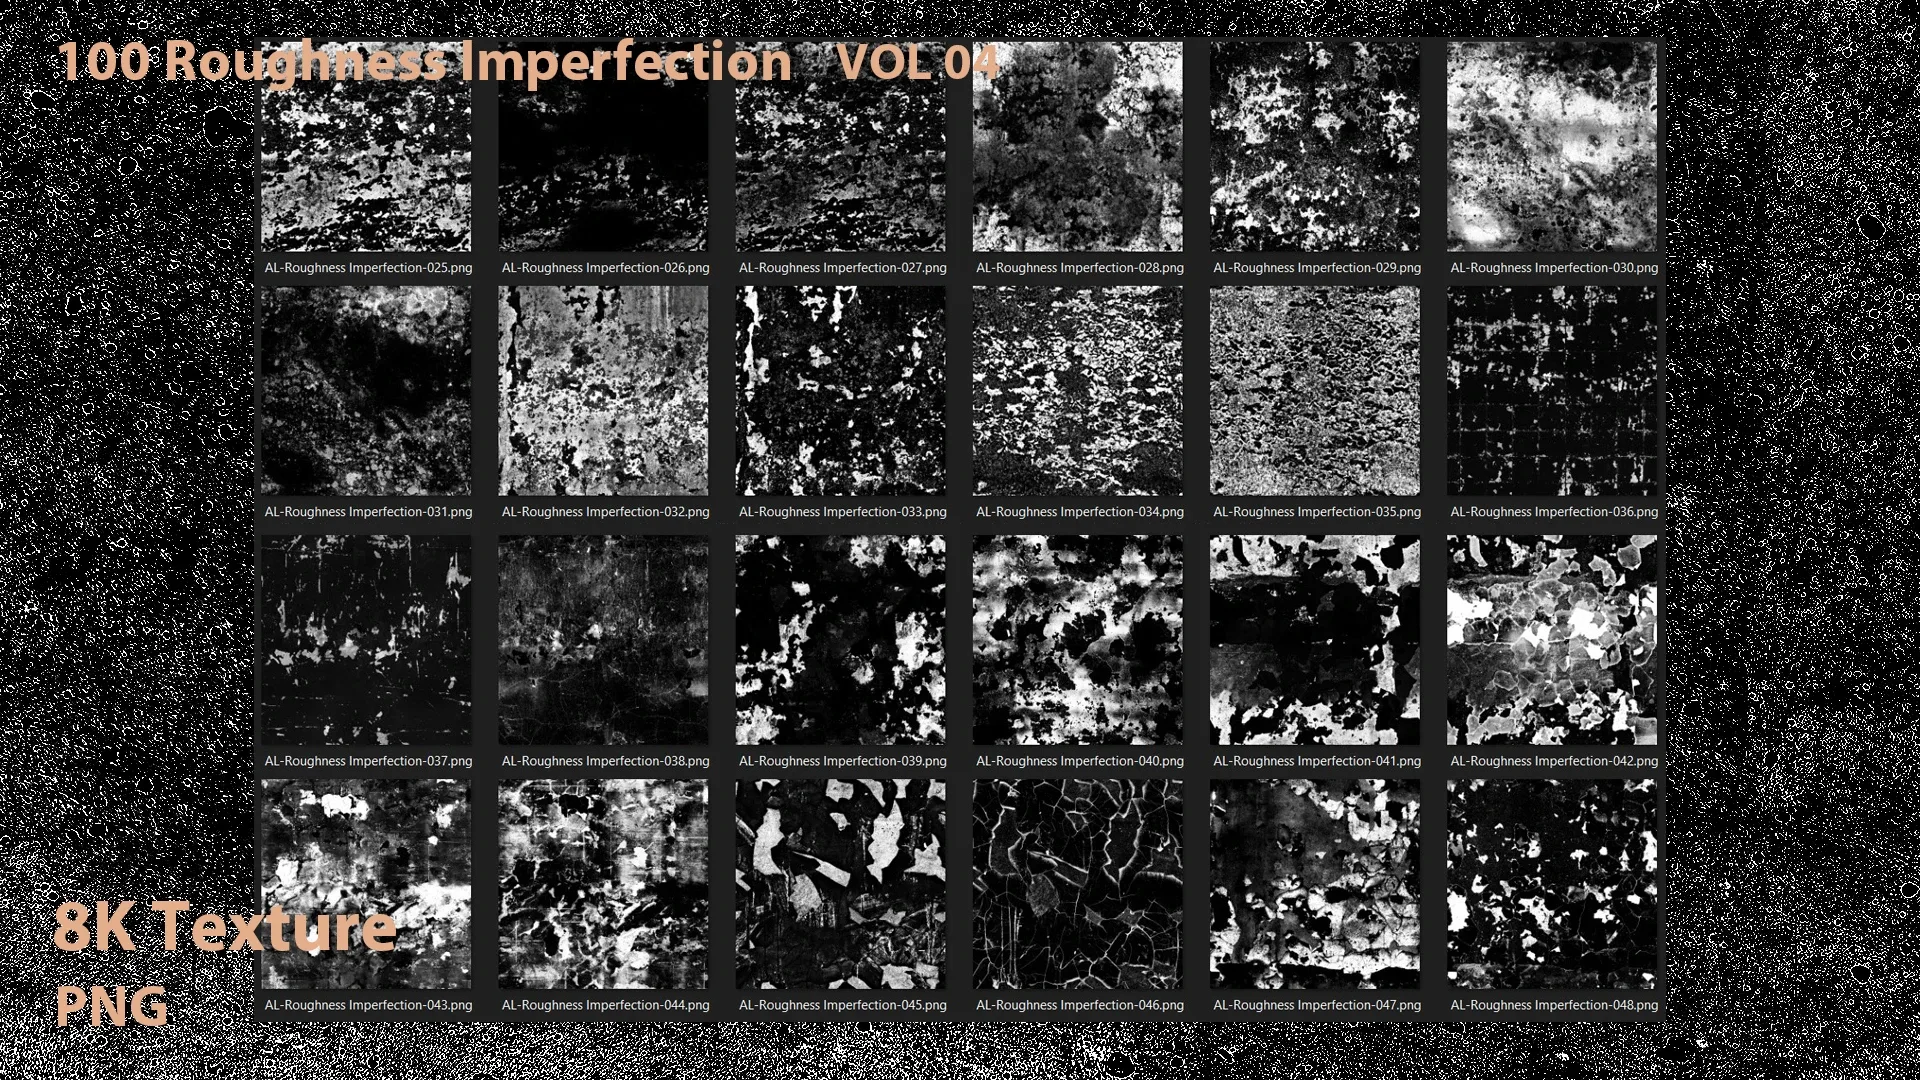 100 Roughness Imperfection - VOL 4